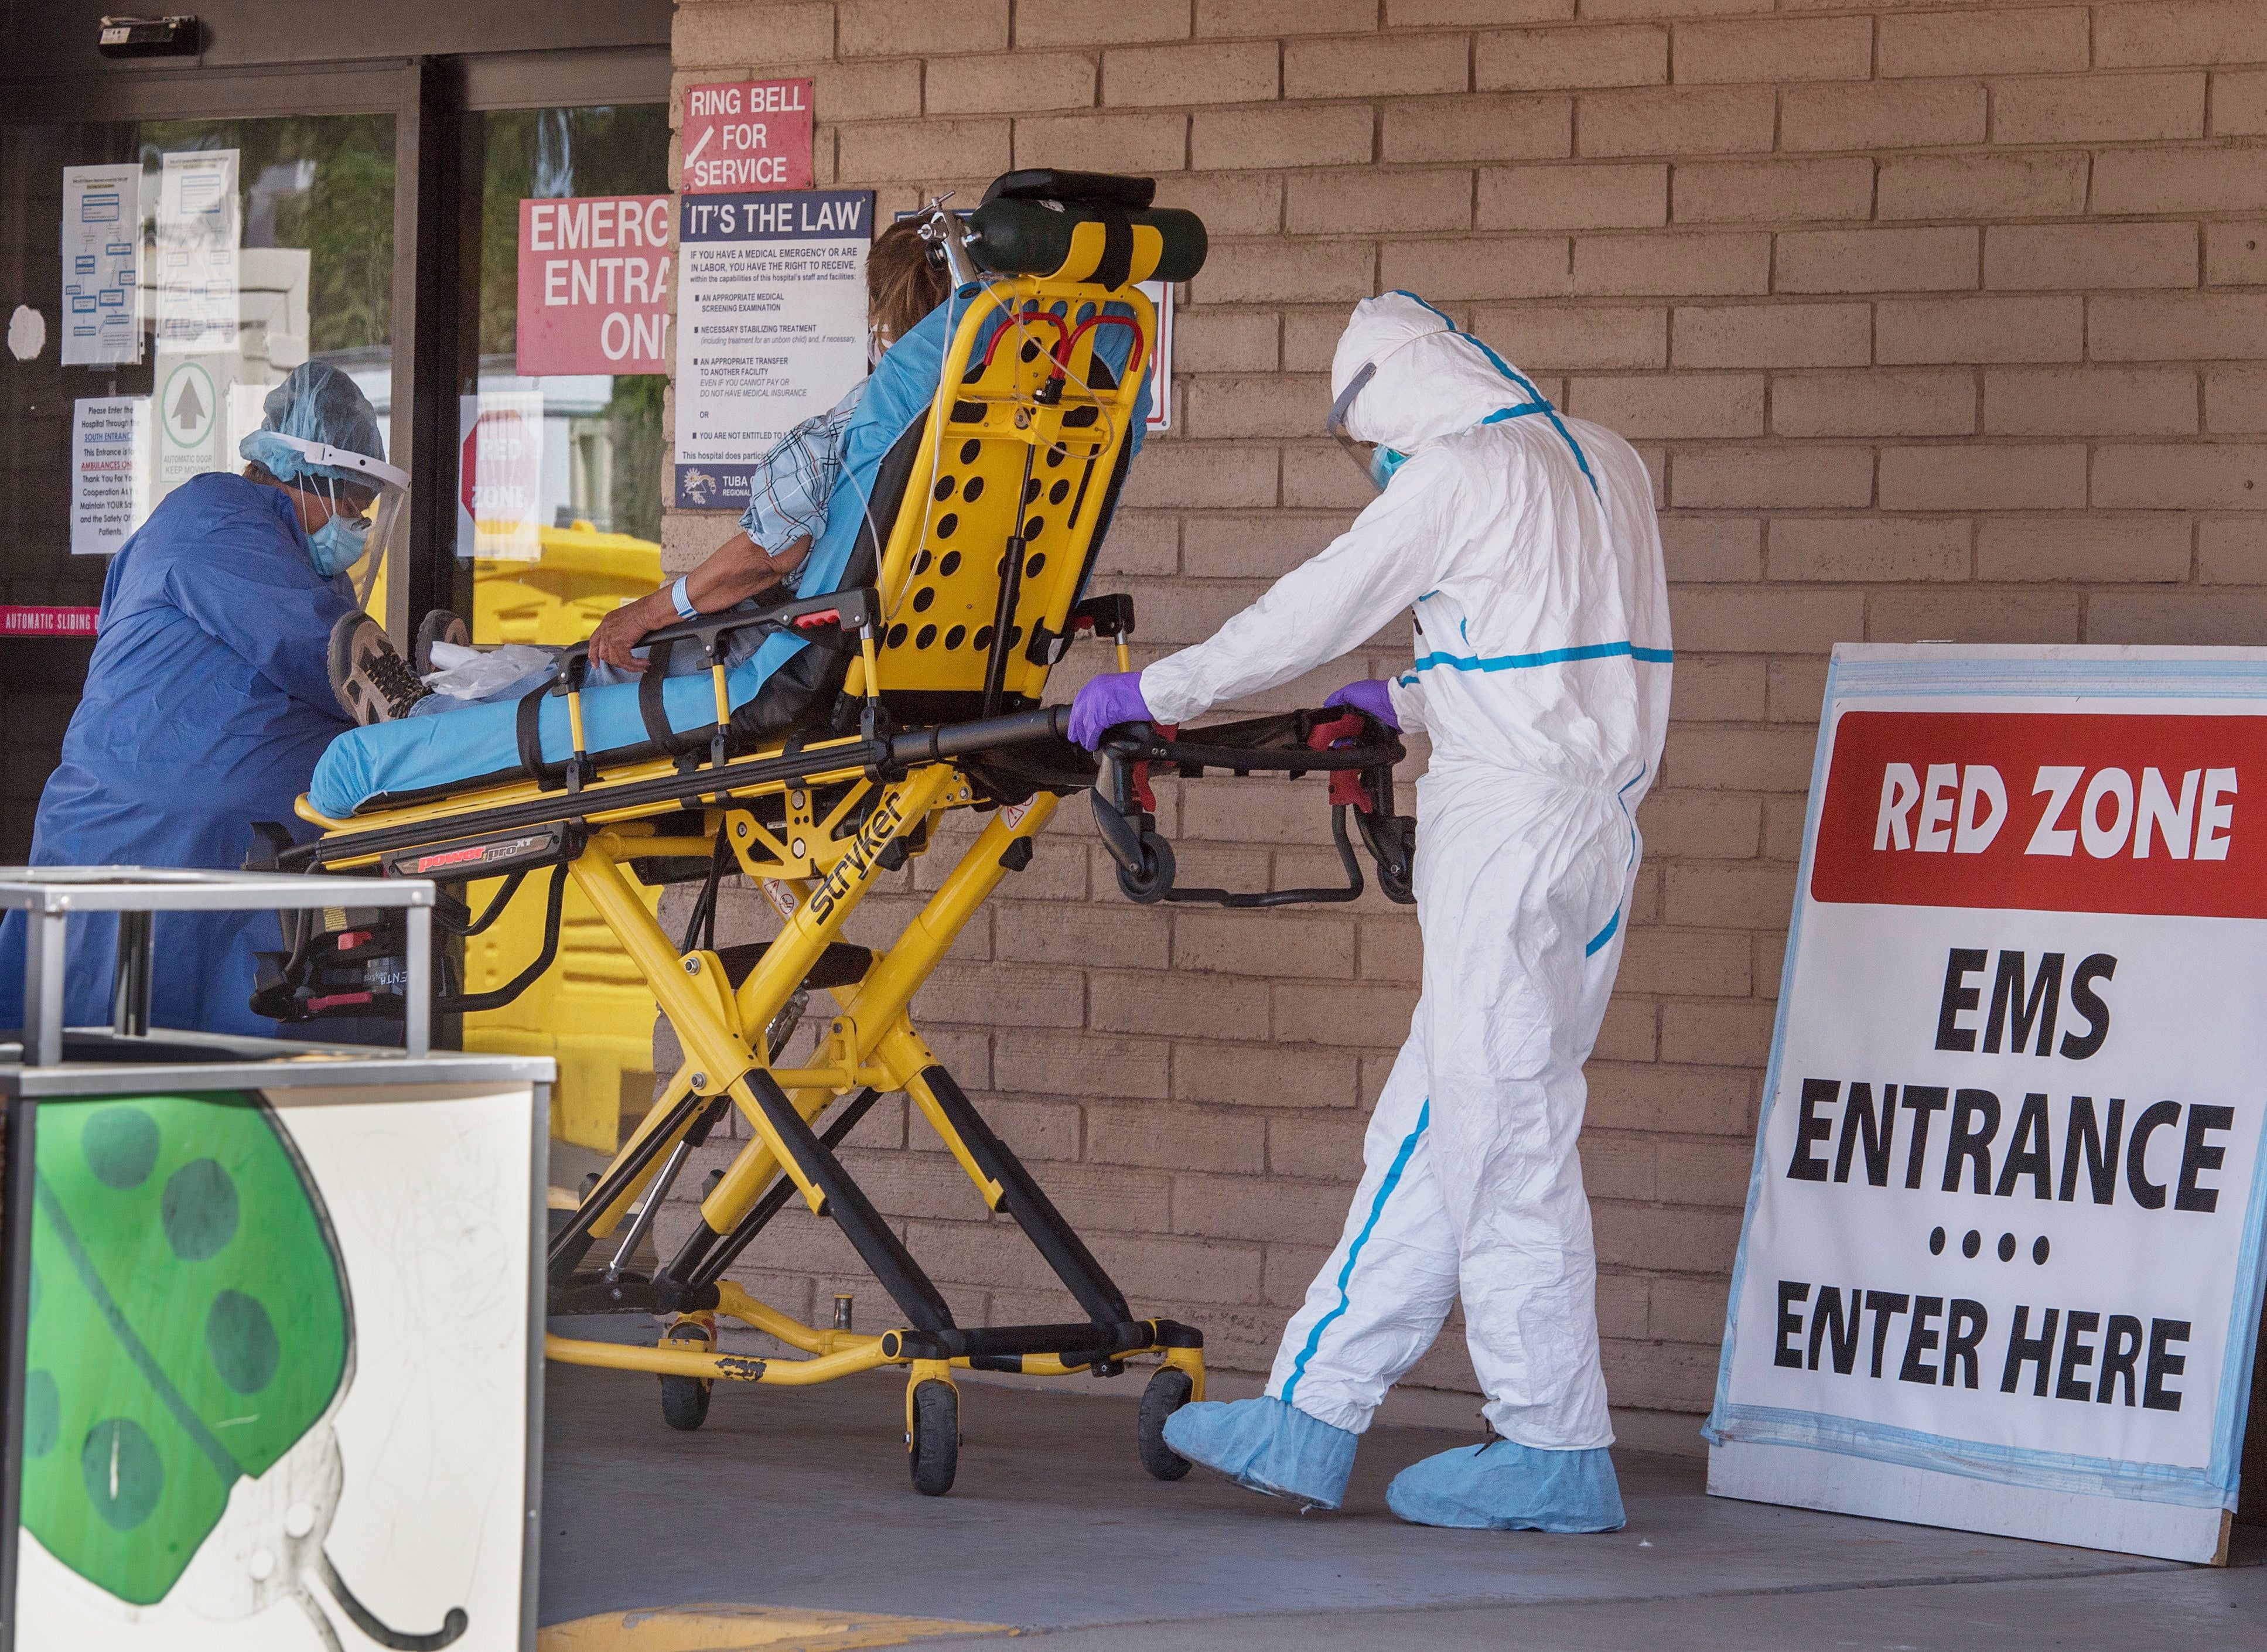 A patient is taken from an ambulance to the emergency room of a hospital in the Navajo Nation town of Tuba City, Ariz., on May 24. Weeks of delays in delivering vital coronavirus aid to Native American tribes exacerbated the outbreak, according to Navajo Nation President Jonathan Nez.